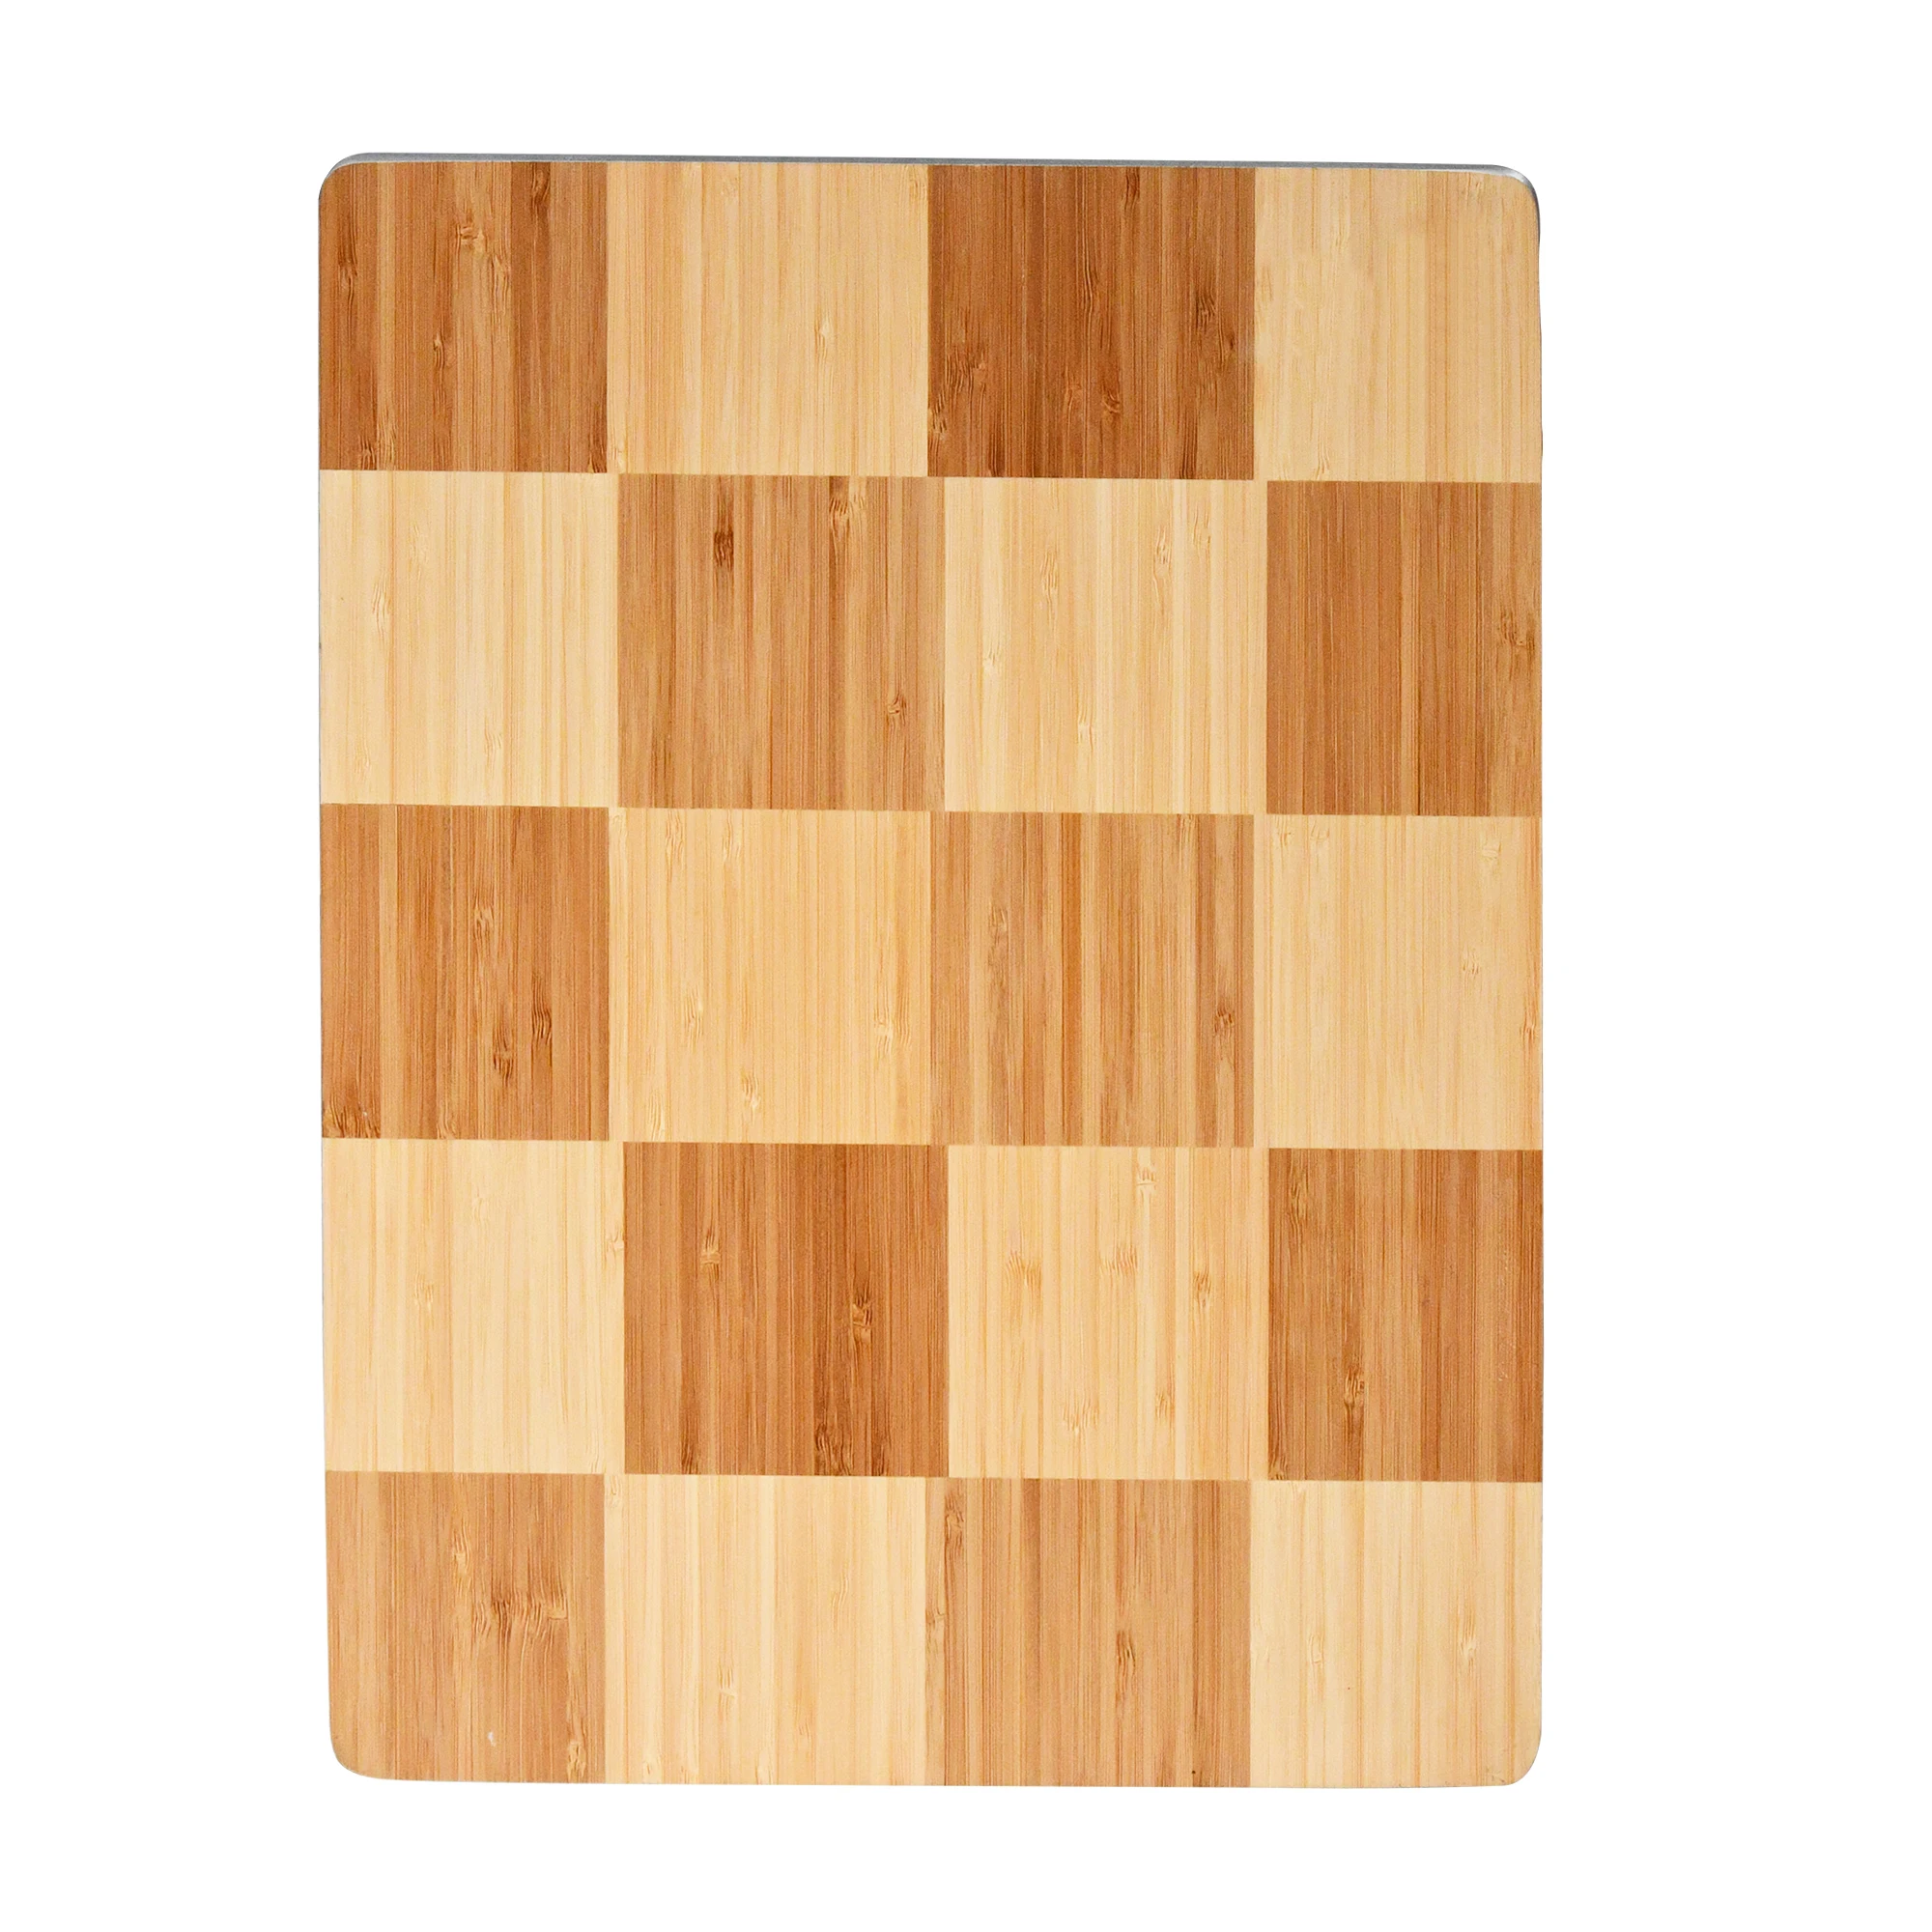 Bamboo Cheap Serving Boards with Deep Juice Groove Side Handles - Charcuterie & Chopping Butcher Block for Meat - Kitchen Gadget